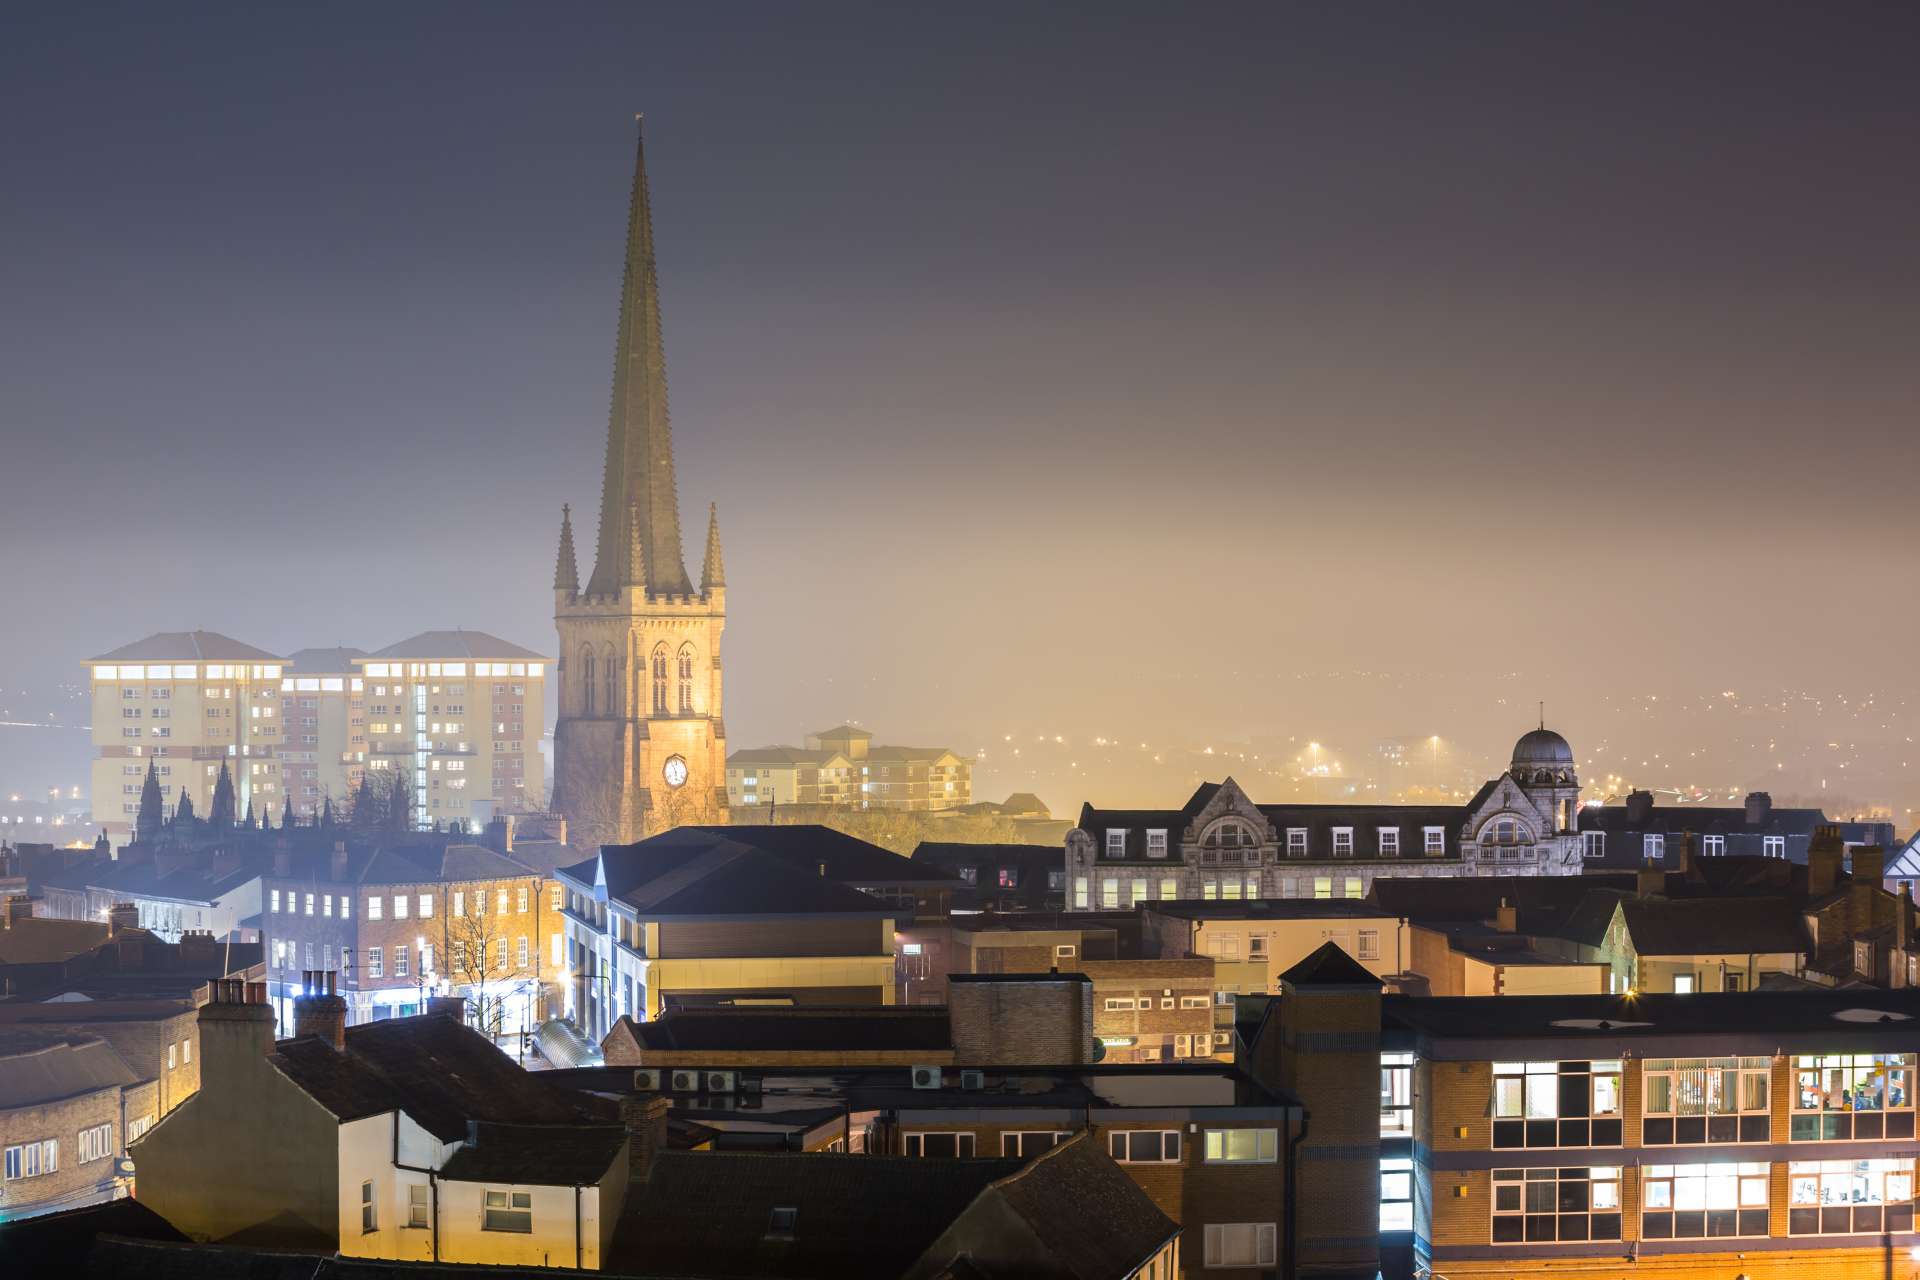 City of Wakefield at night